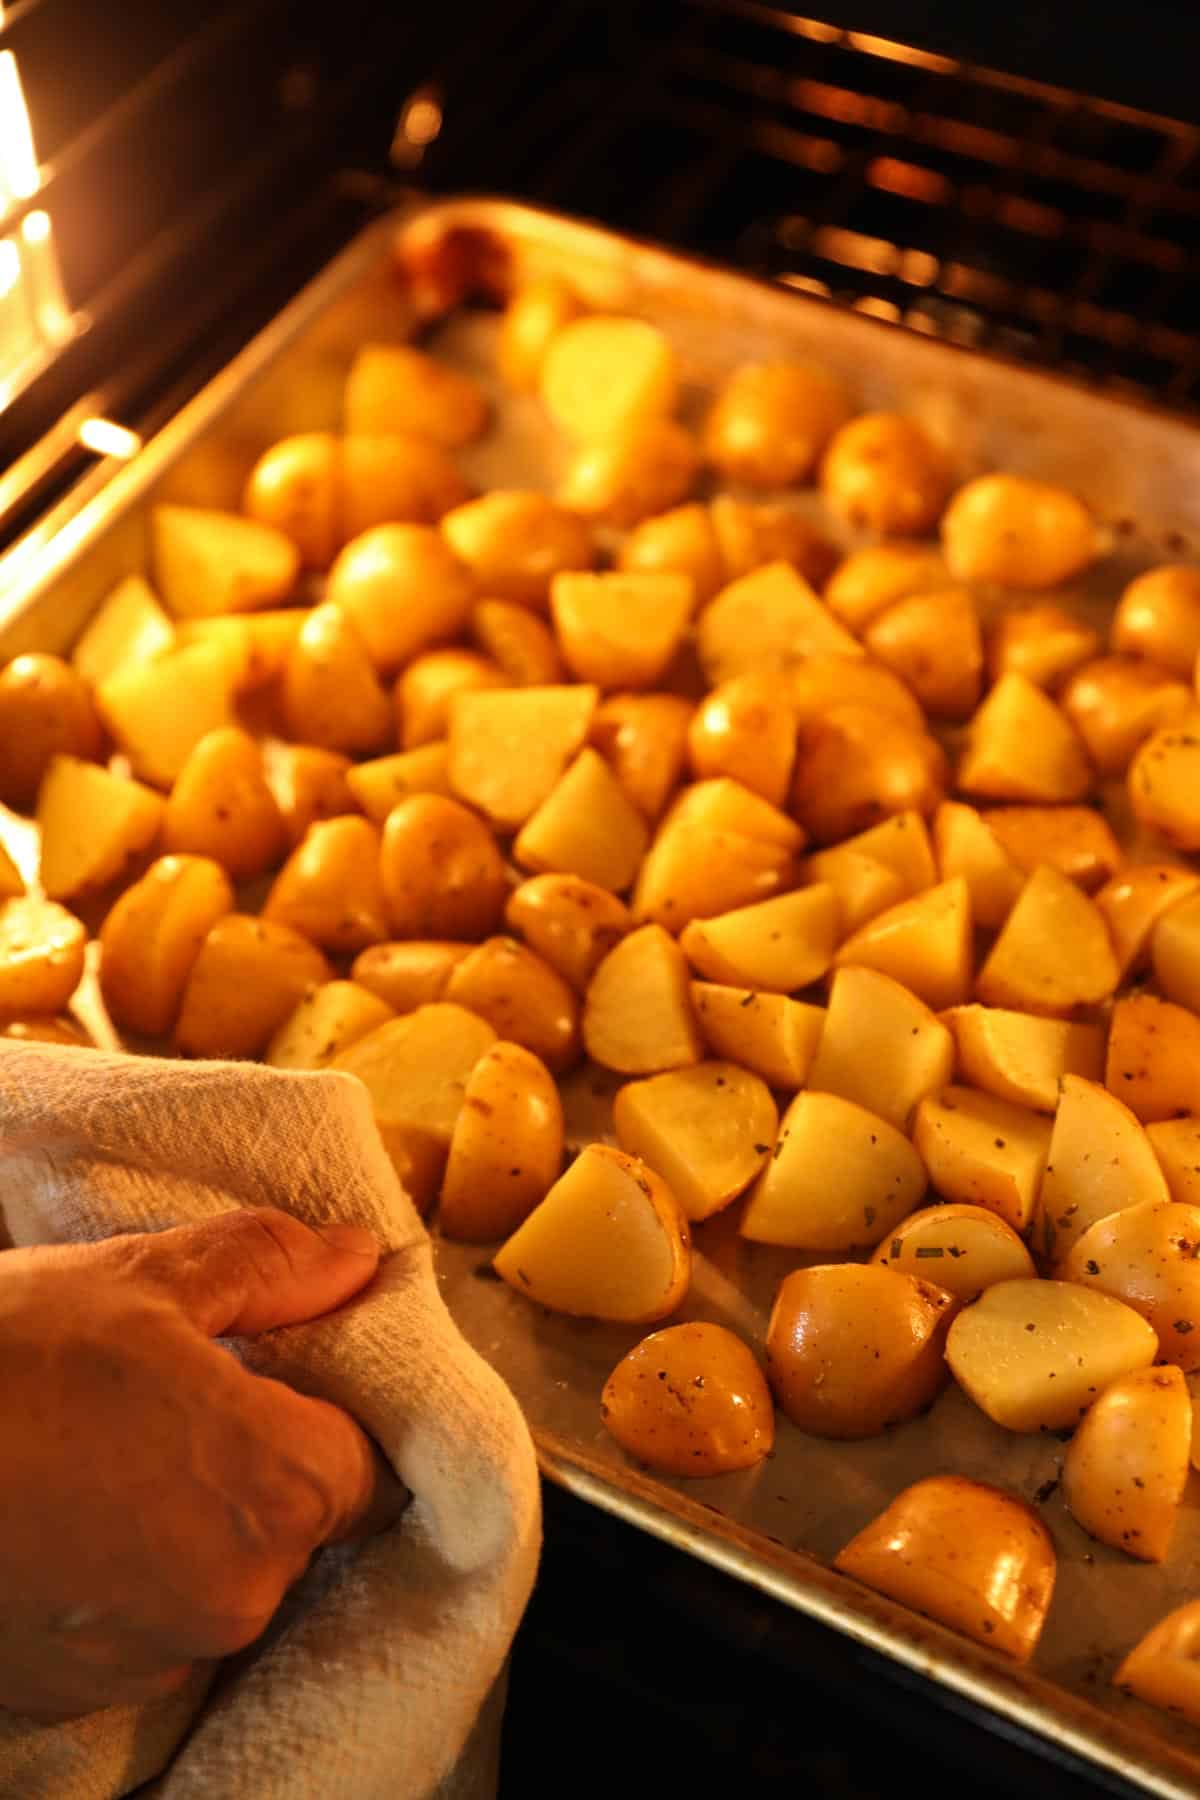 shaking potatoes in an oven